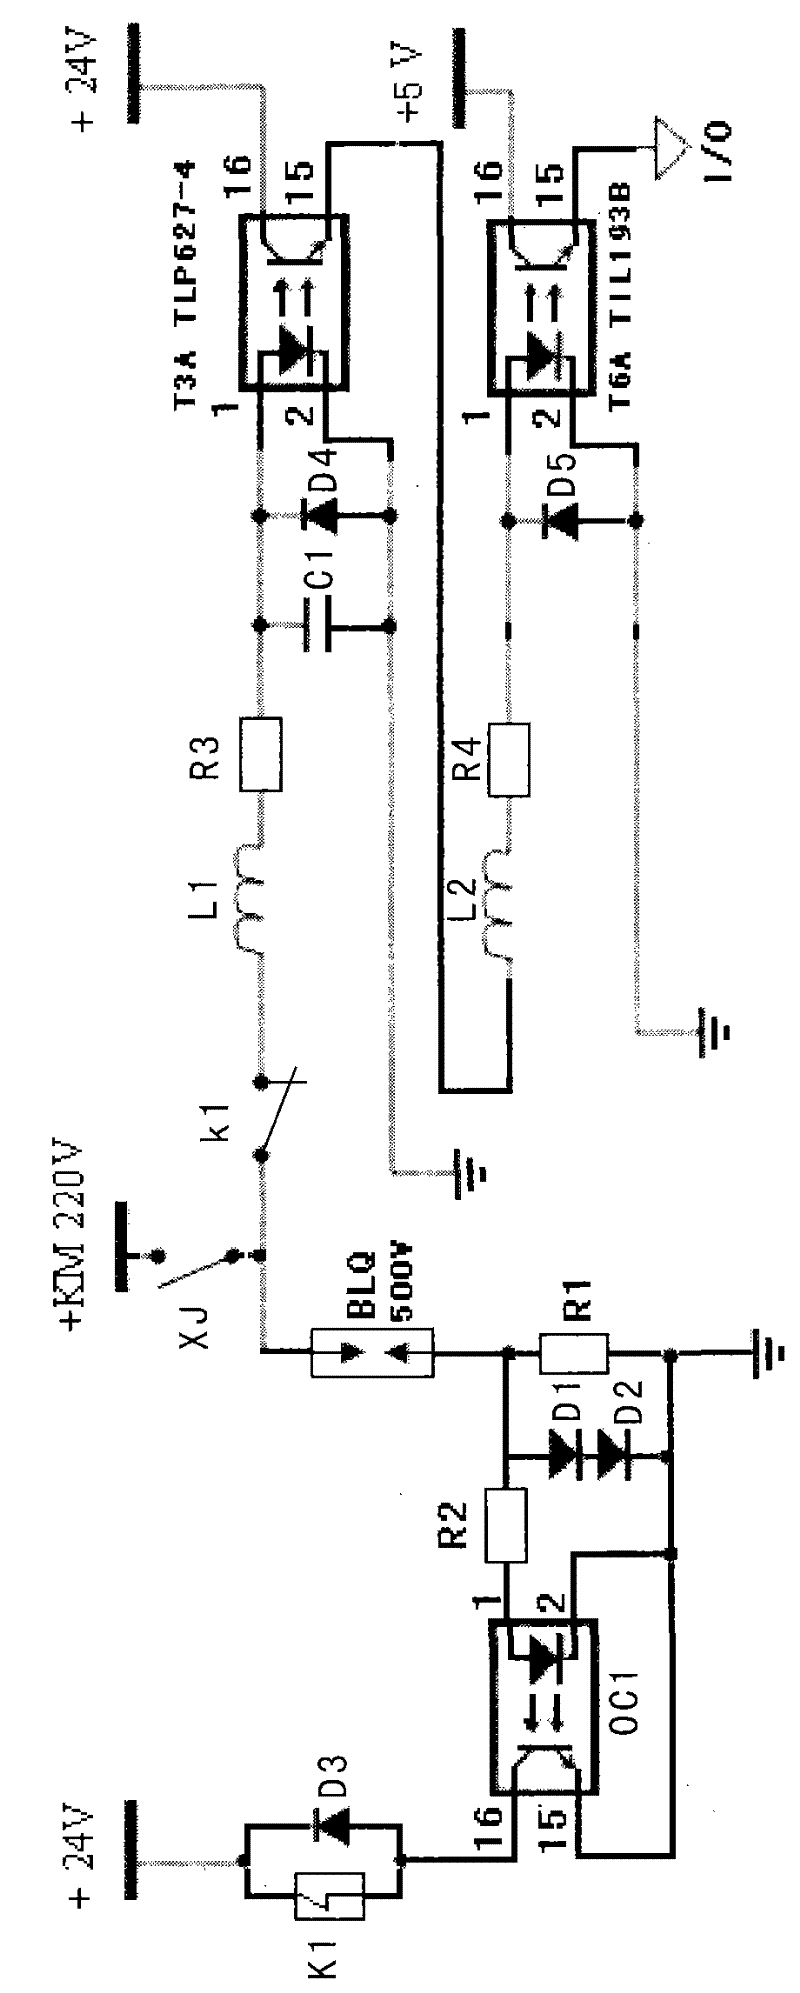 Anti-overvoltage measurement and control system and method